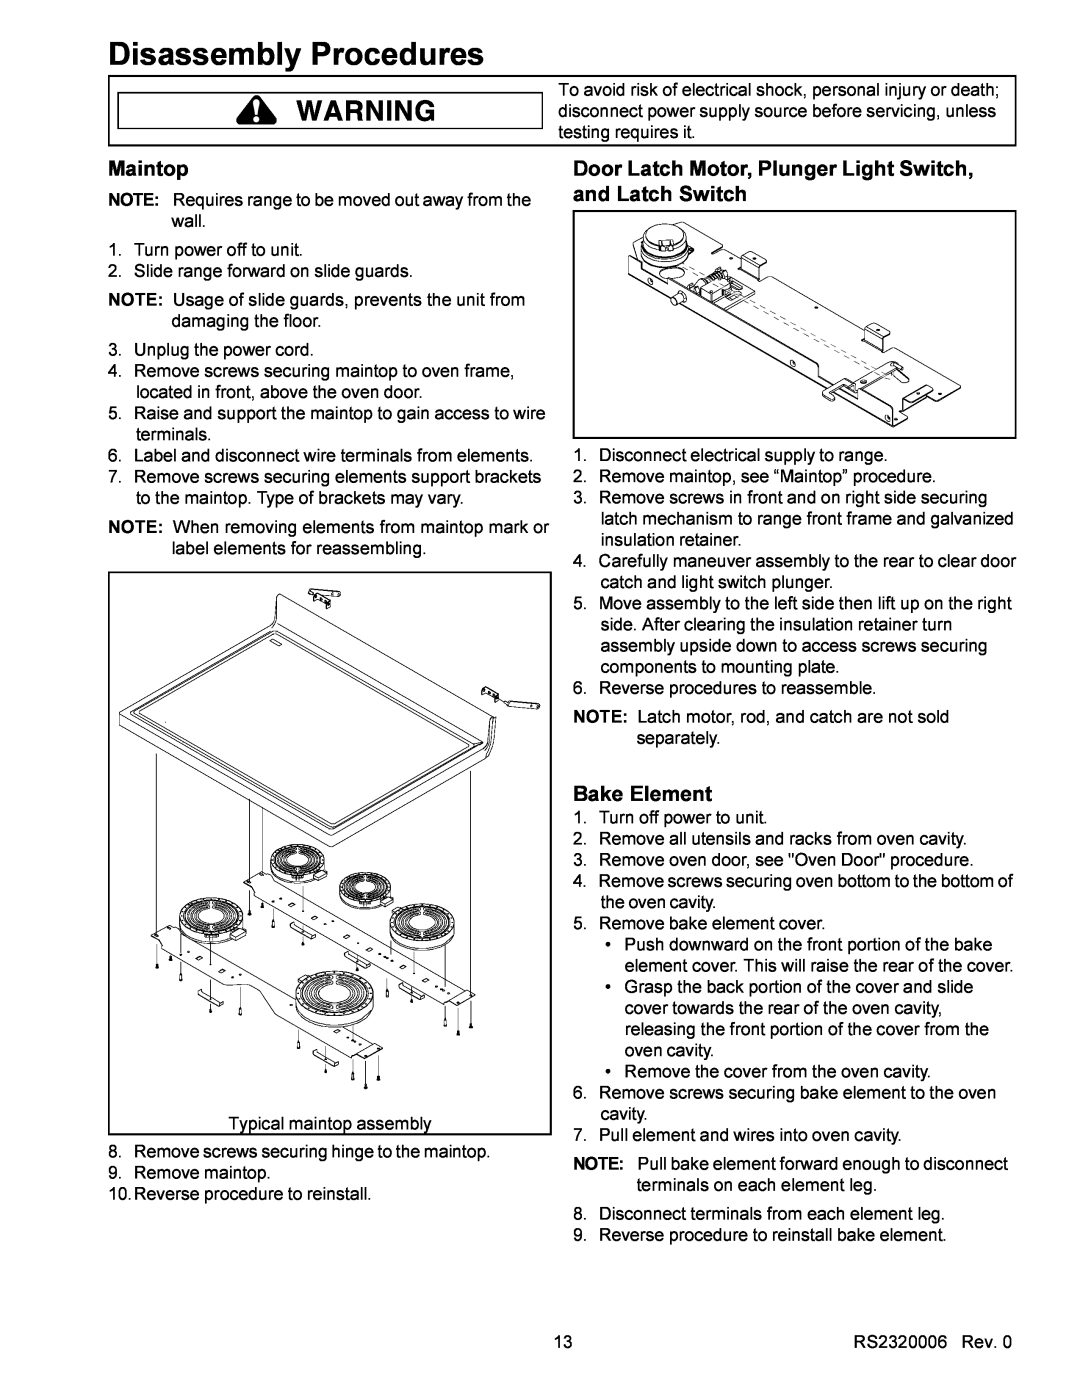 Amana RS2320006 service manual Maintop, Door Latch Motor, Plunger Light Switch, and Latch Switch, Bake Element, wall 